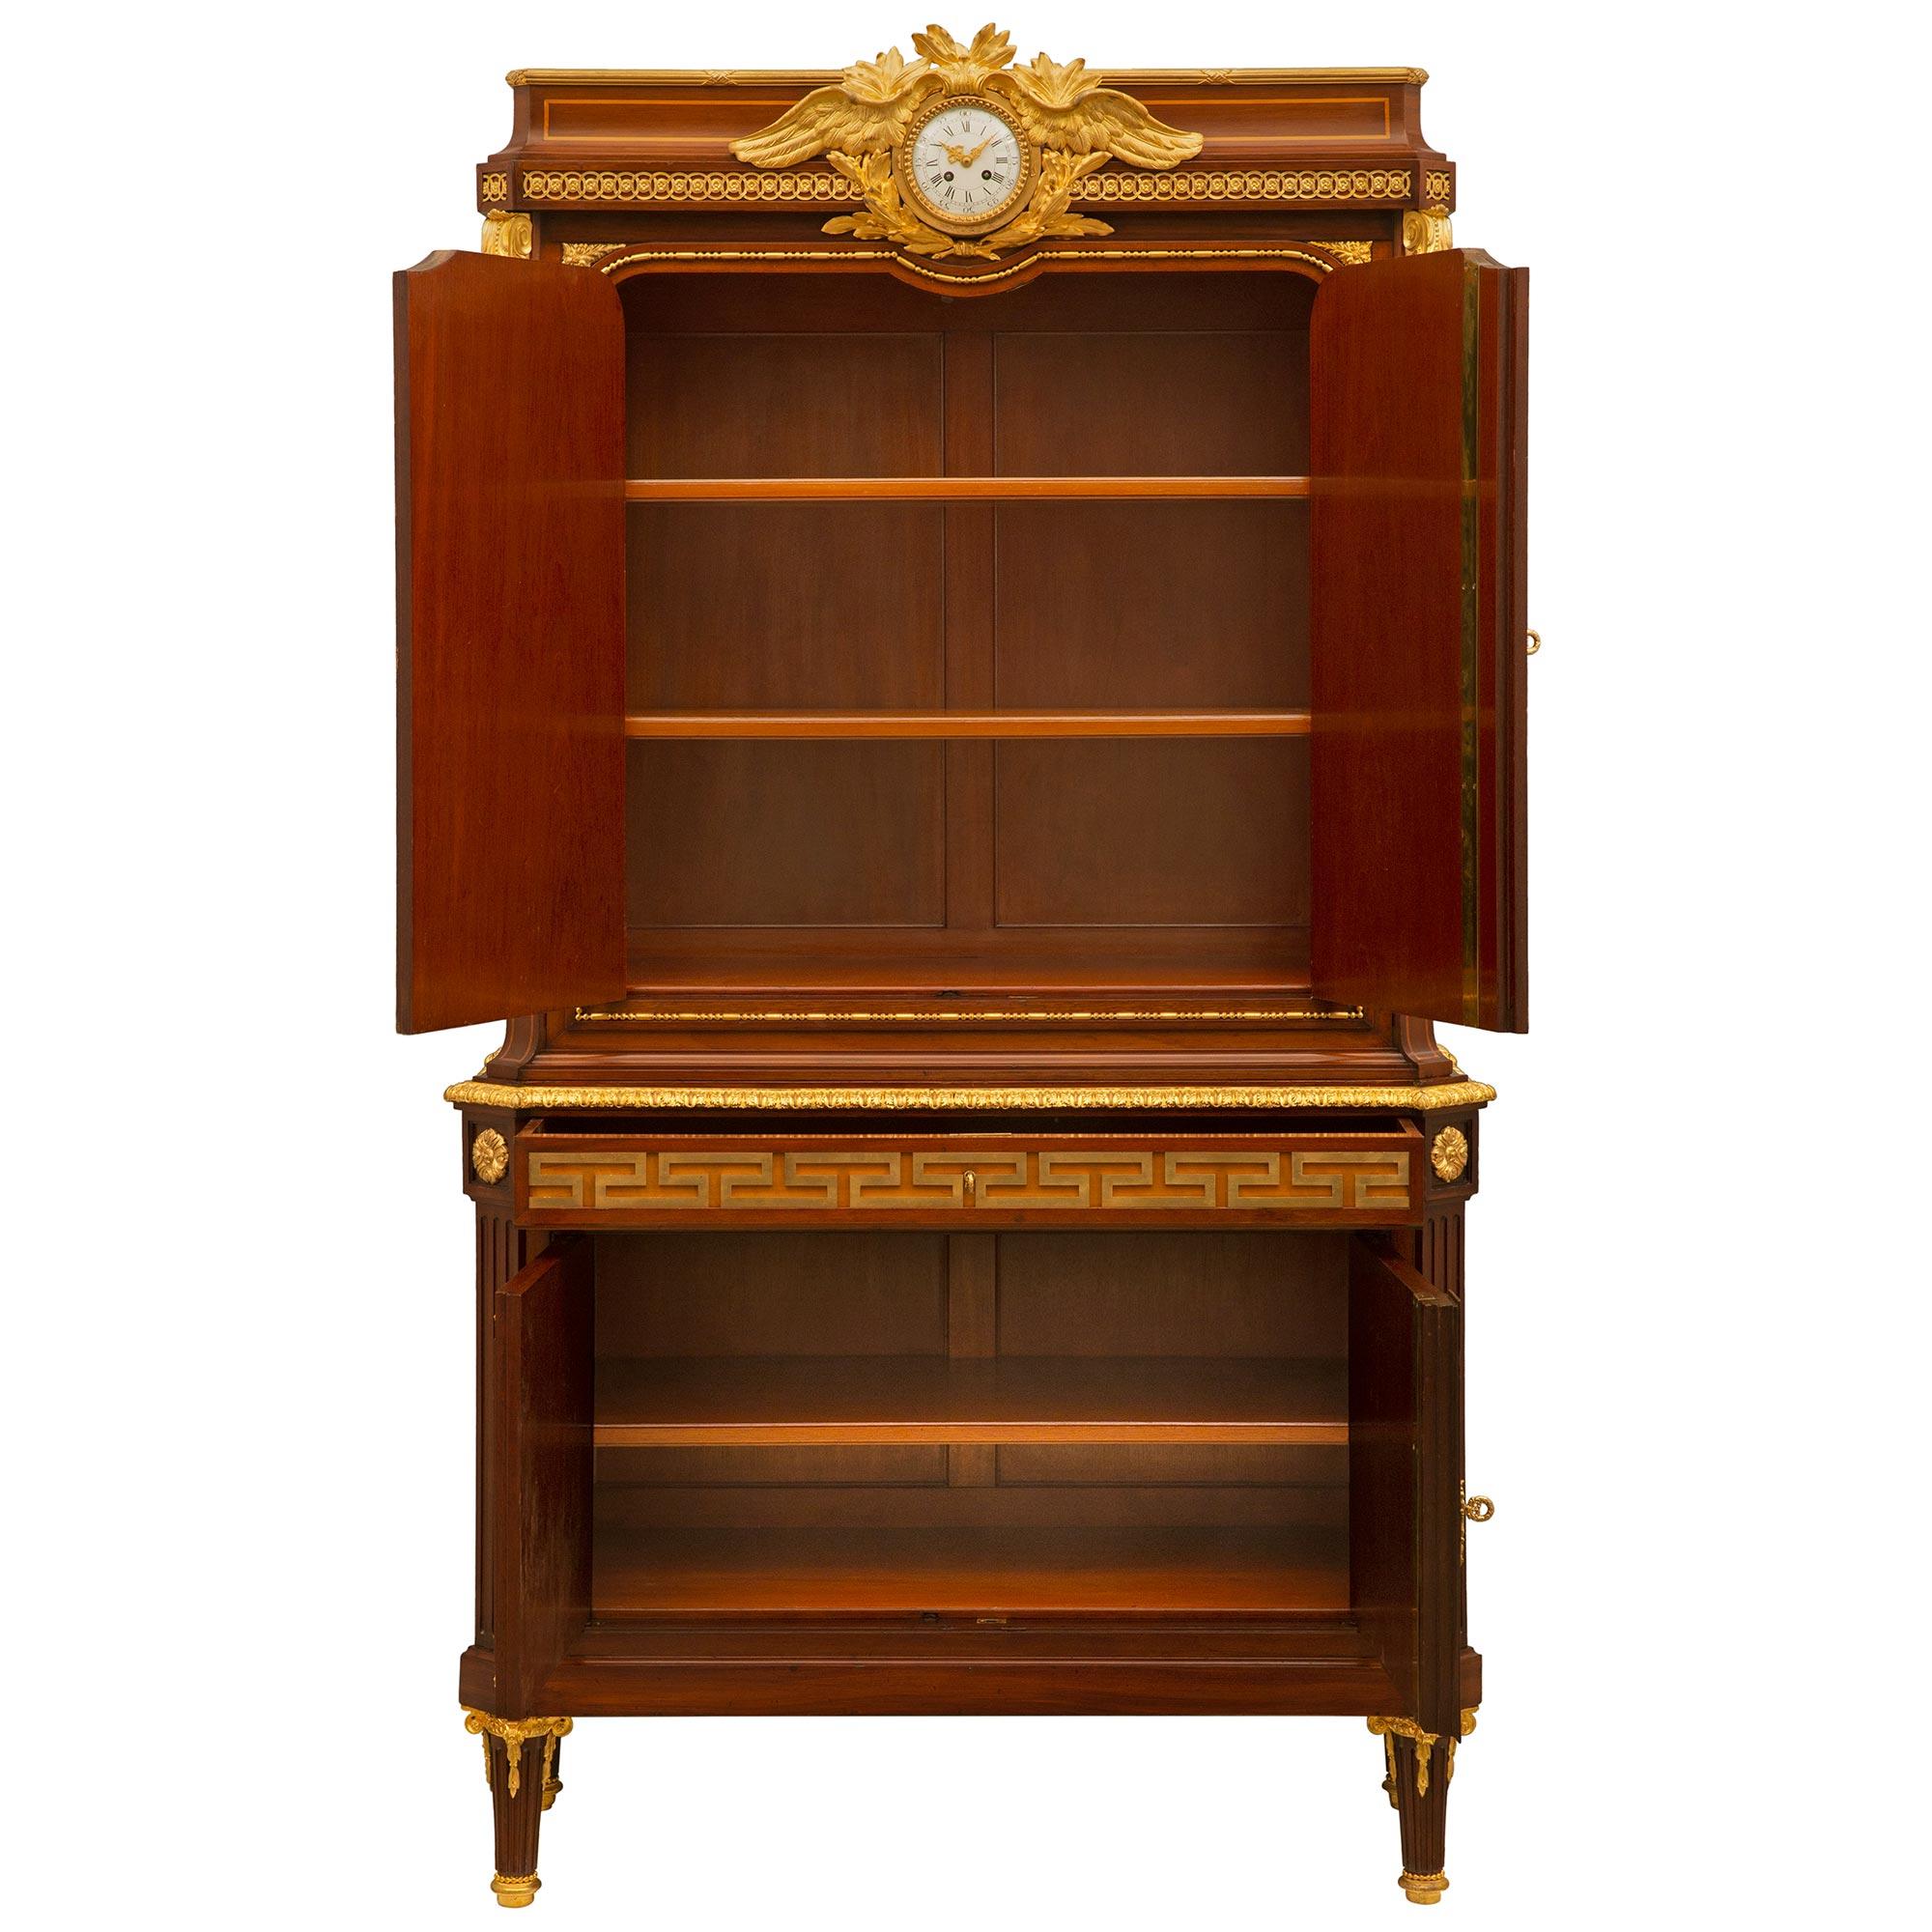 A stunning and extremely high quality French 19th century Louis XVI st. Mahogany, Tulipwood and ormolu clock cabinet signed Mercier Frères. The four door one drawer cabinet is raised by elegant circular tapered fluted legs with fine mottled and